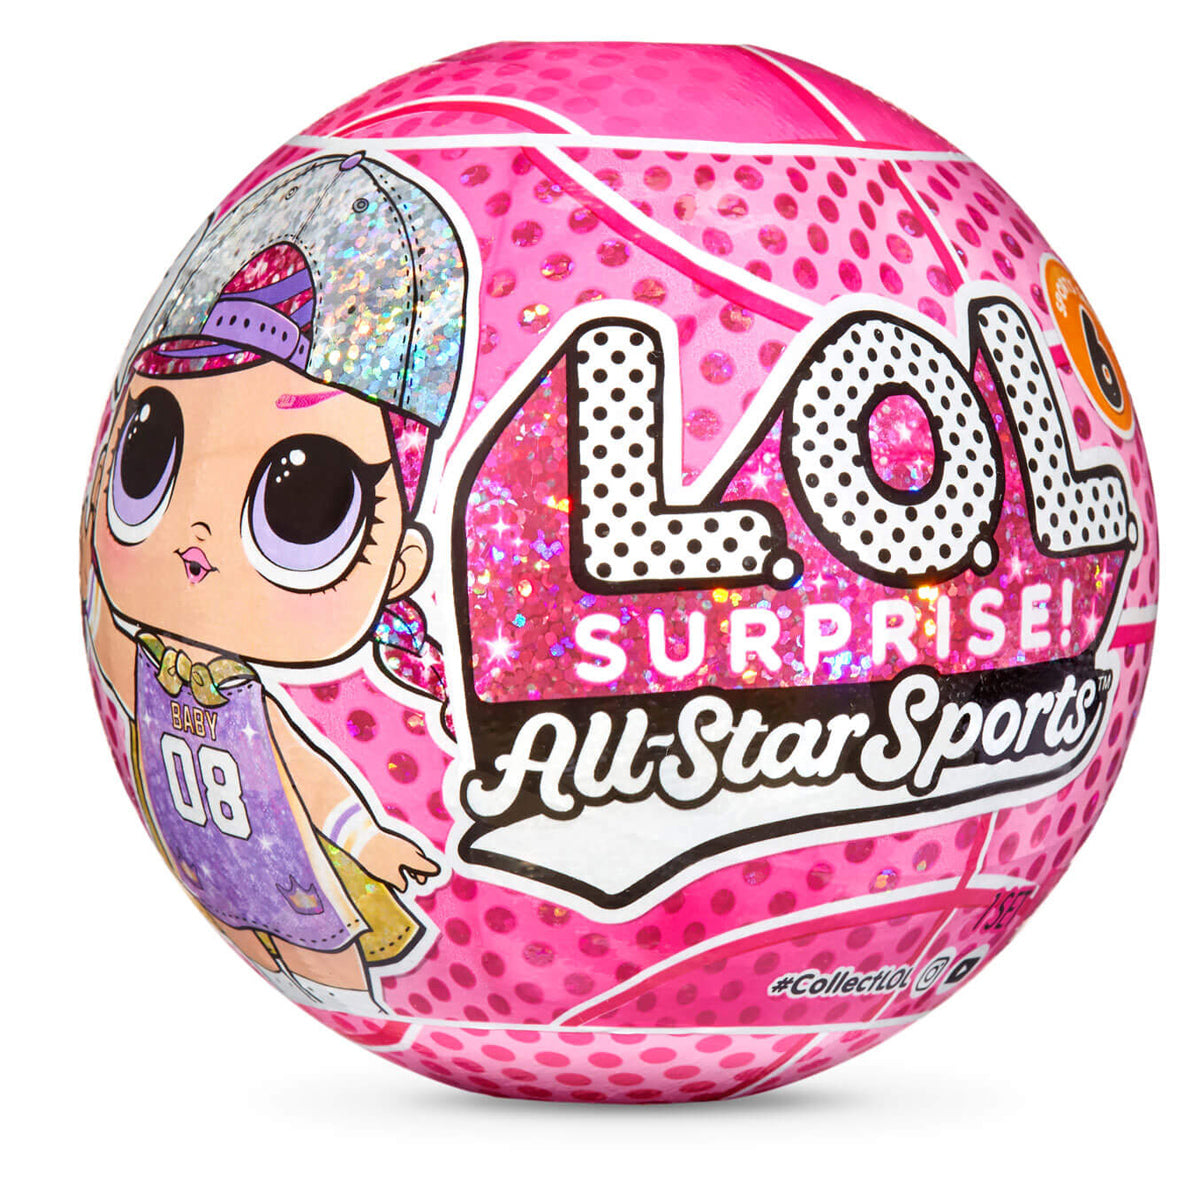 LOL Surprise! AllStar Sports Sparkly Basketball Series 6 with 8 Surprises (Random Color Pick, 1 Count)